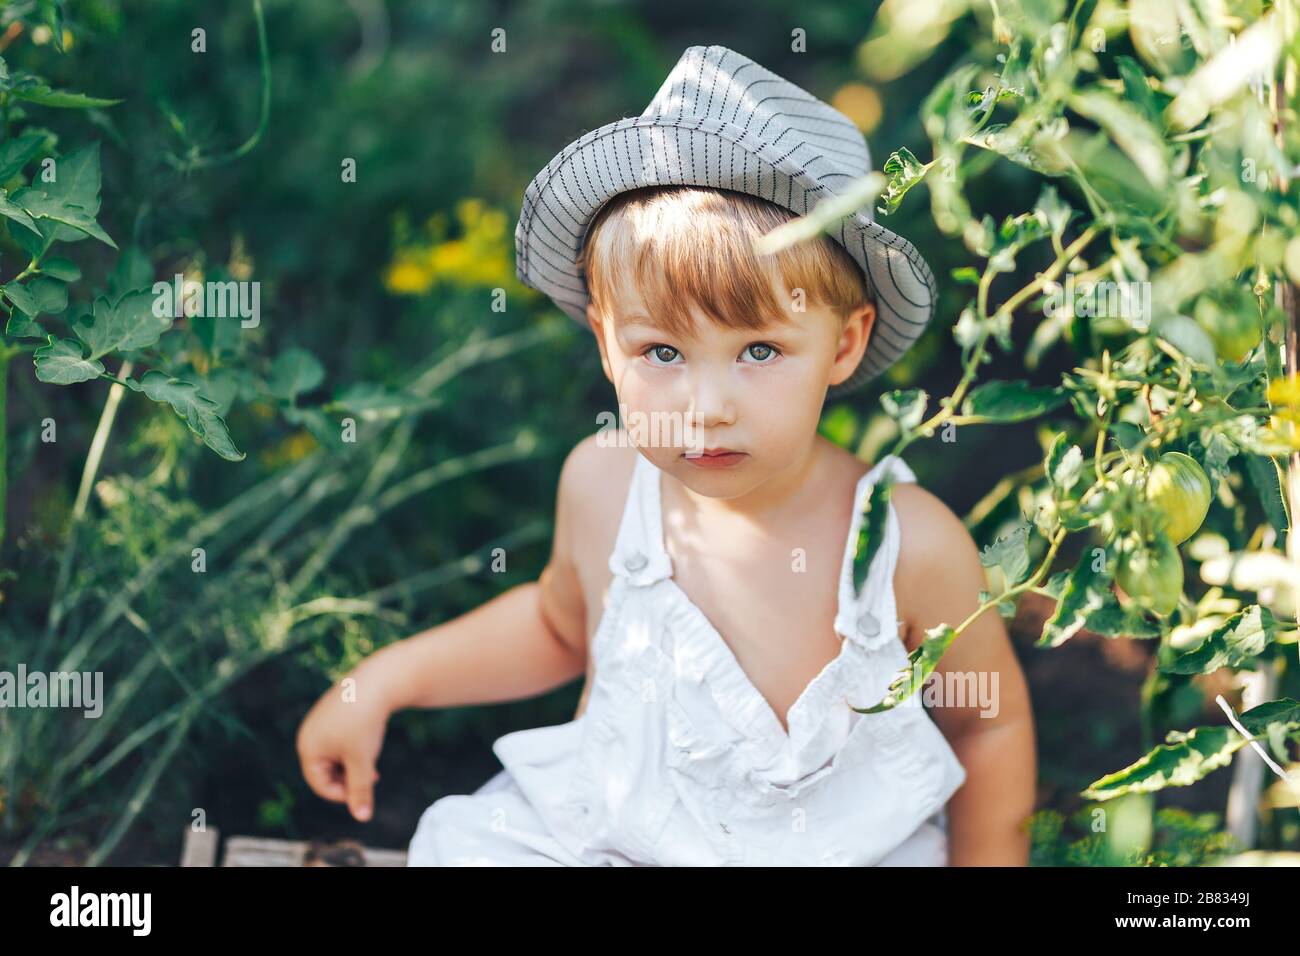 cute boy in hat and casual clothes sitting around tomatoes ang looking at camera, kid model posing in garden Stock Photo